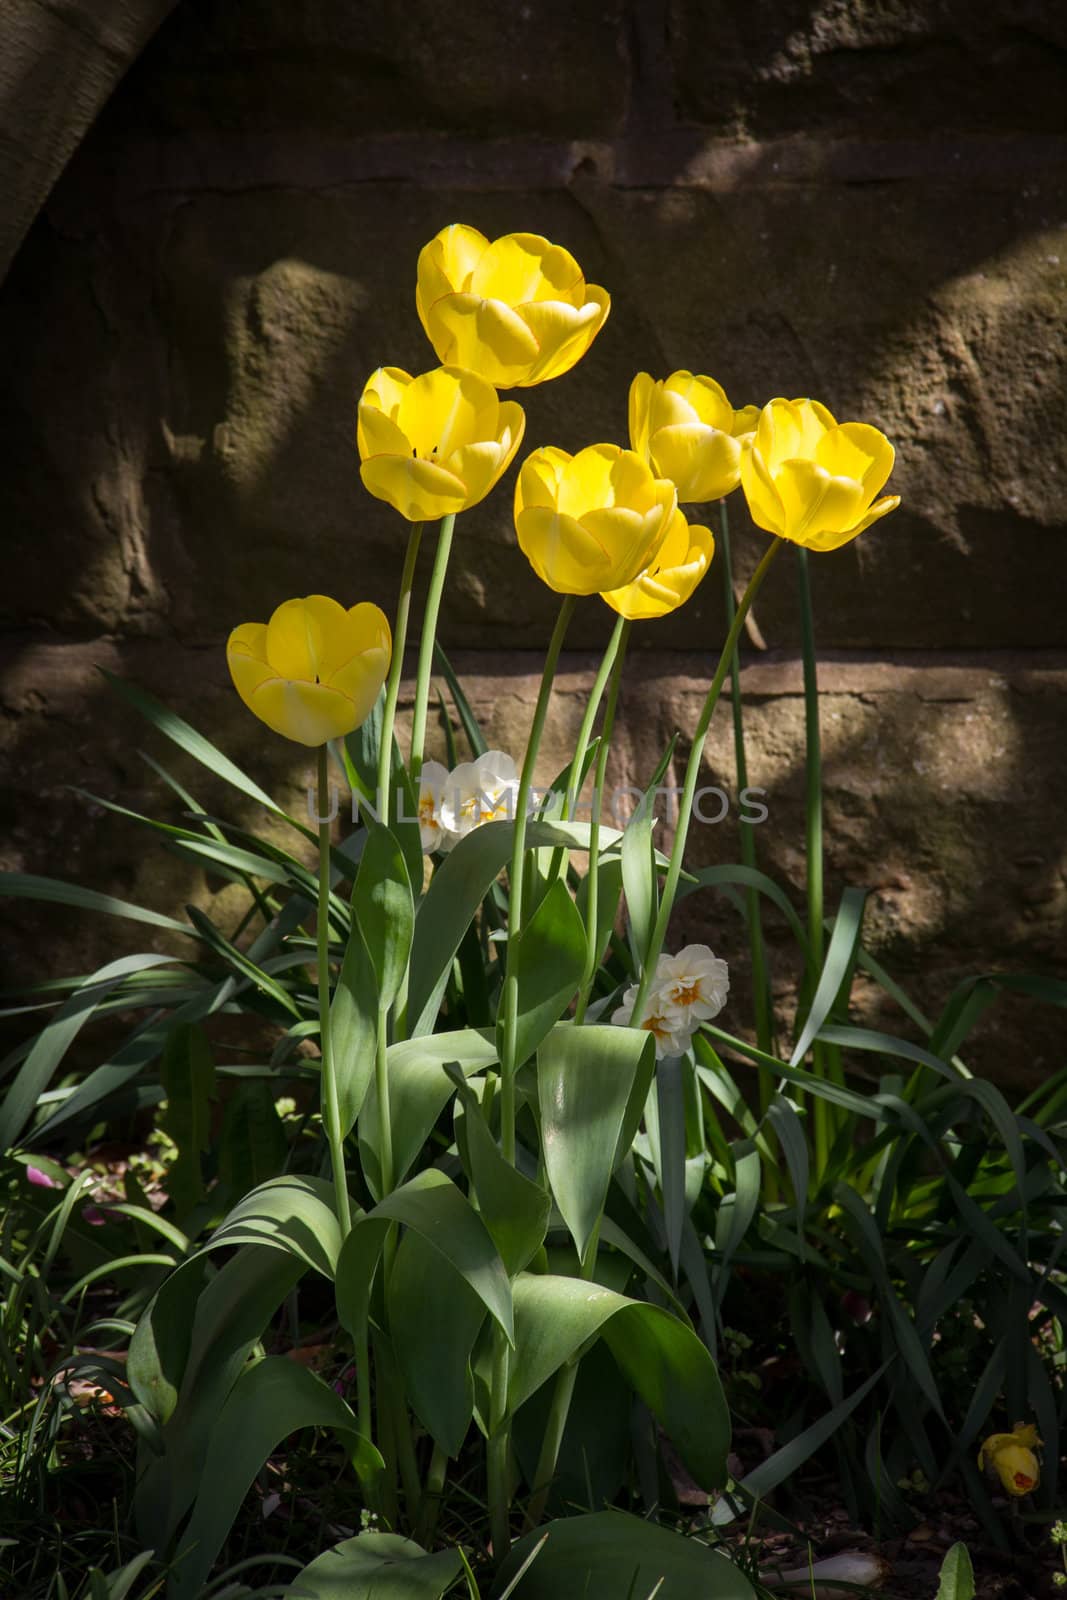 Lovely bright yellow tulips